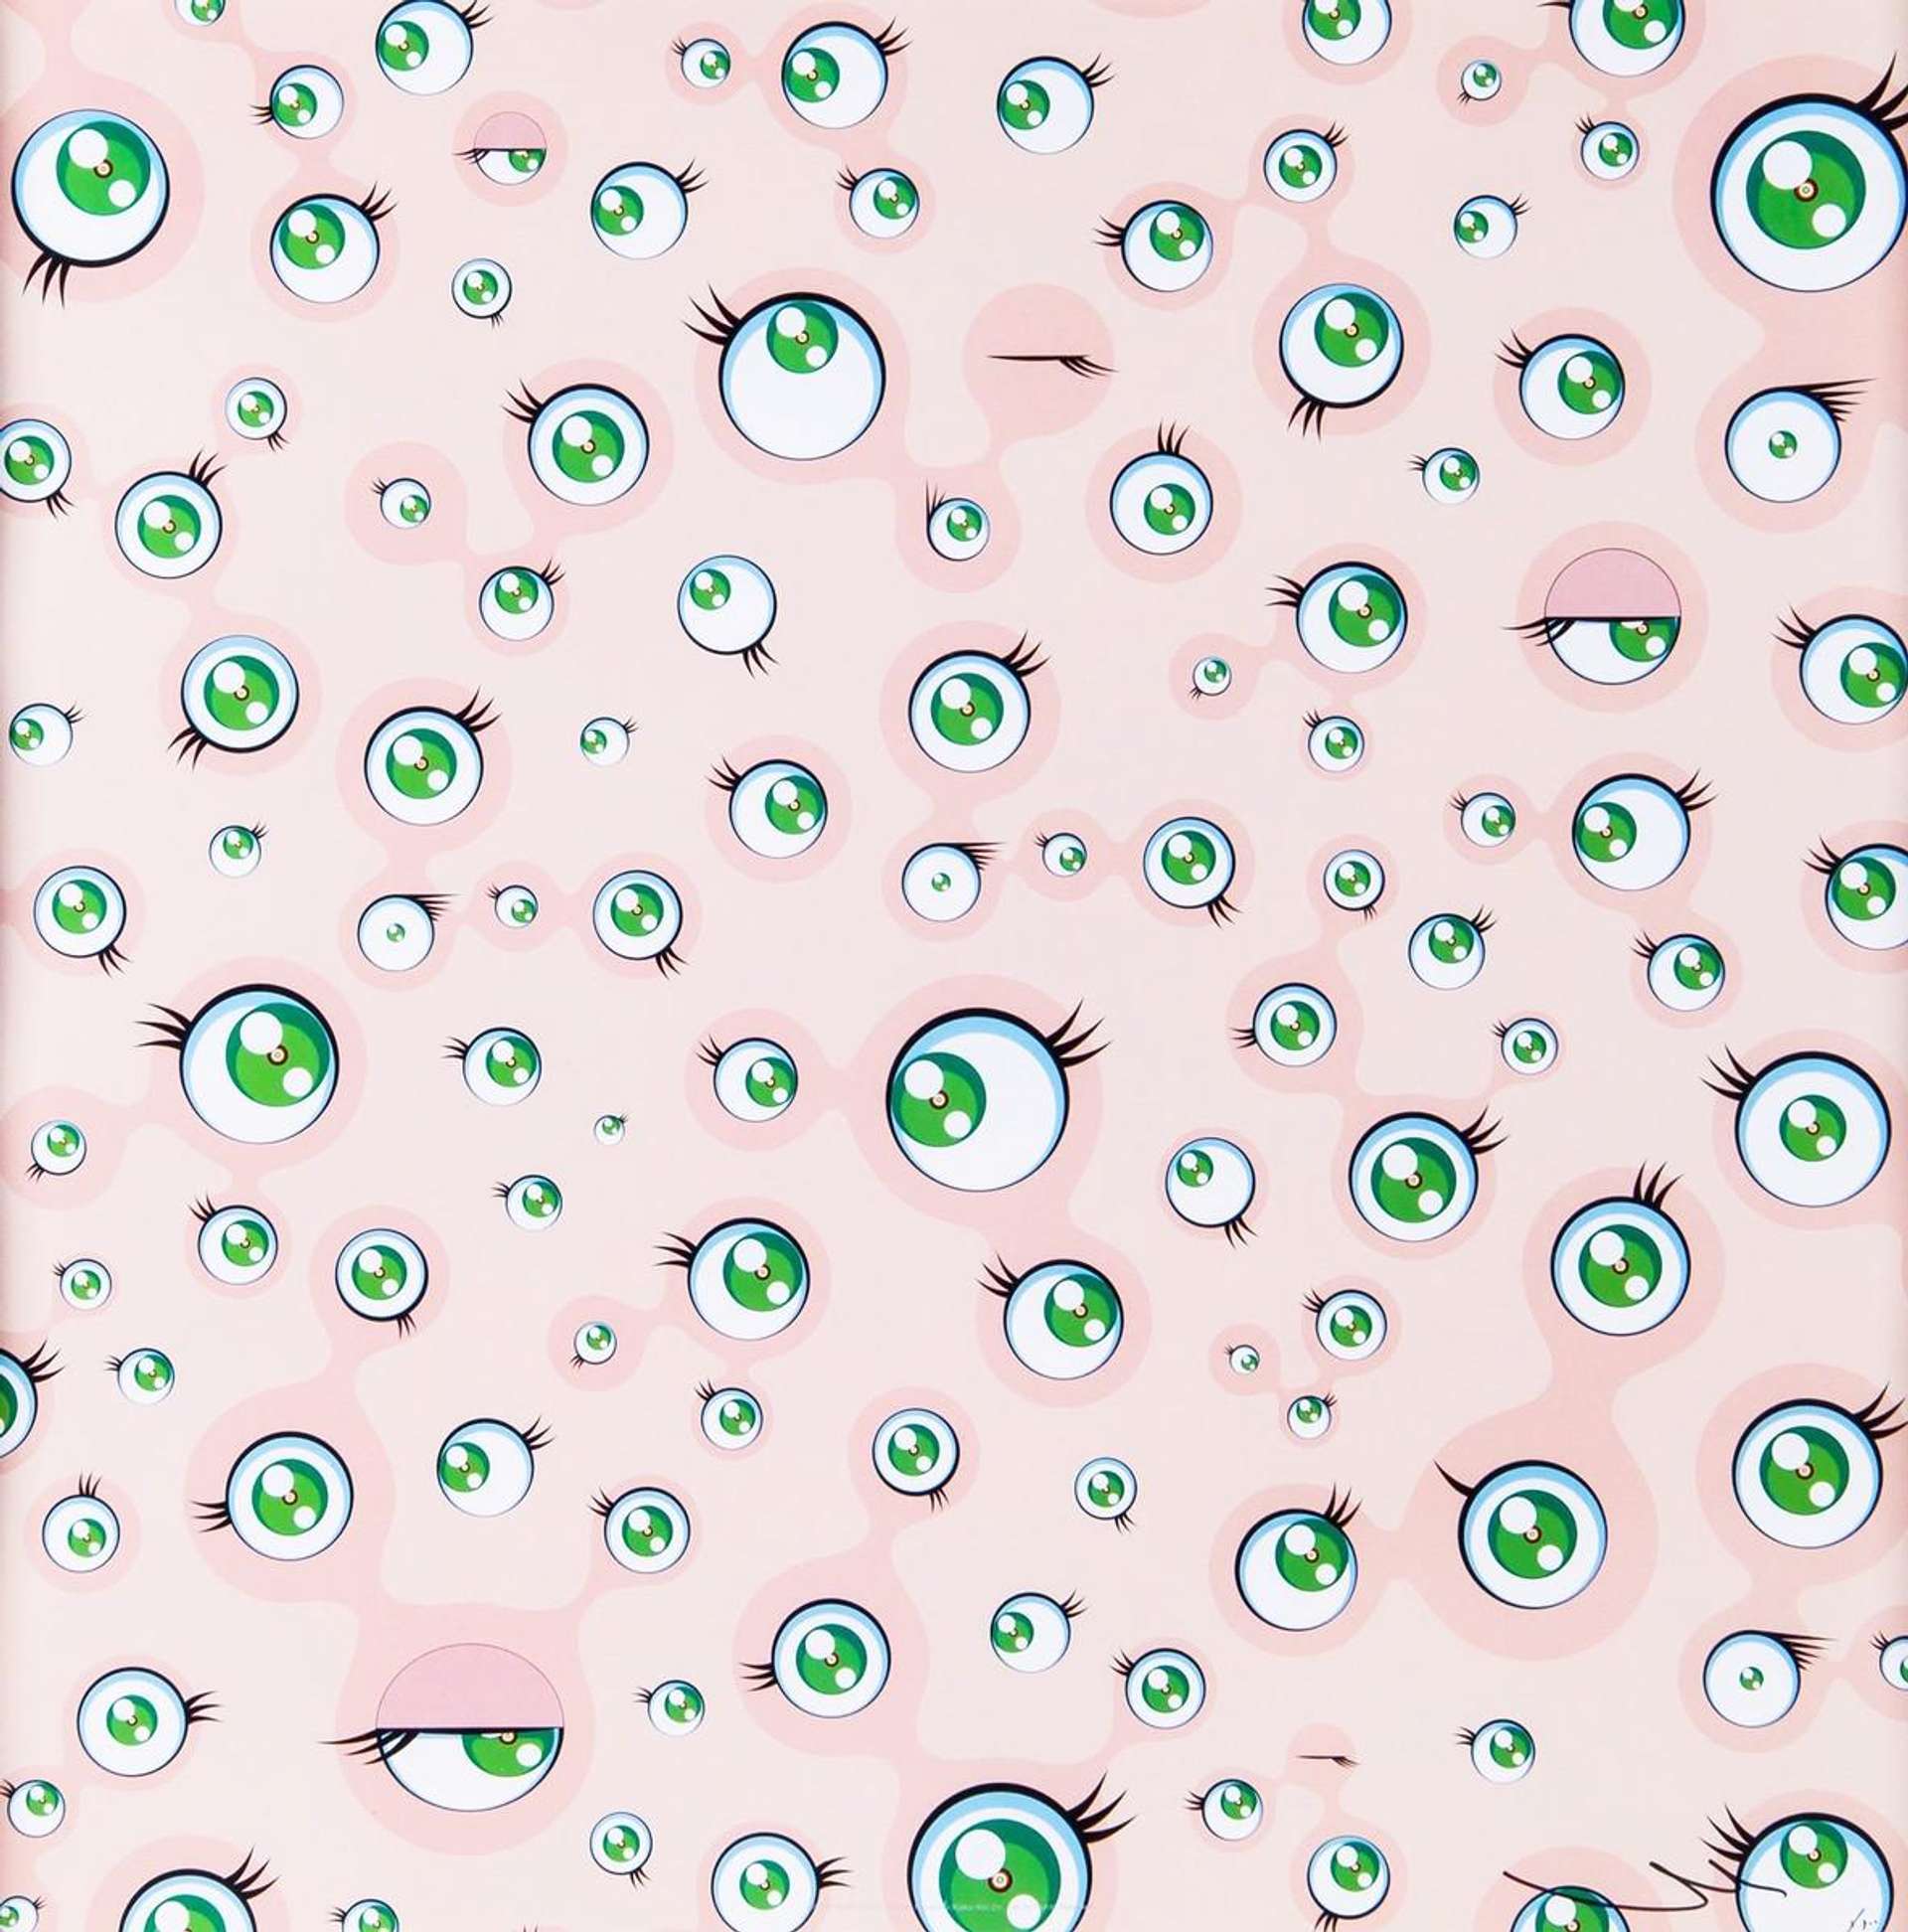 Takashi Murakami’s Jellyfish Eyes. Various expressions of open green eyes against a light pink background.